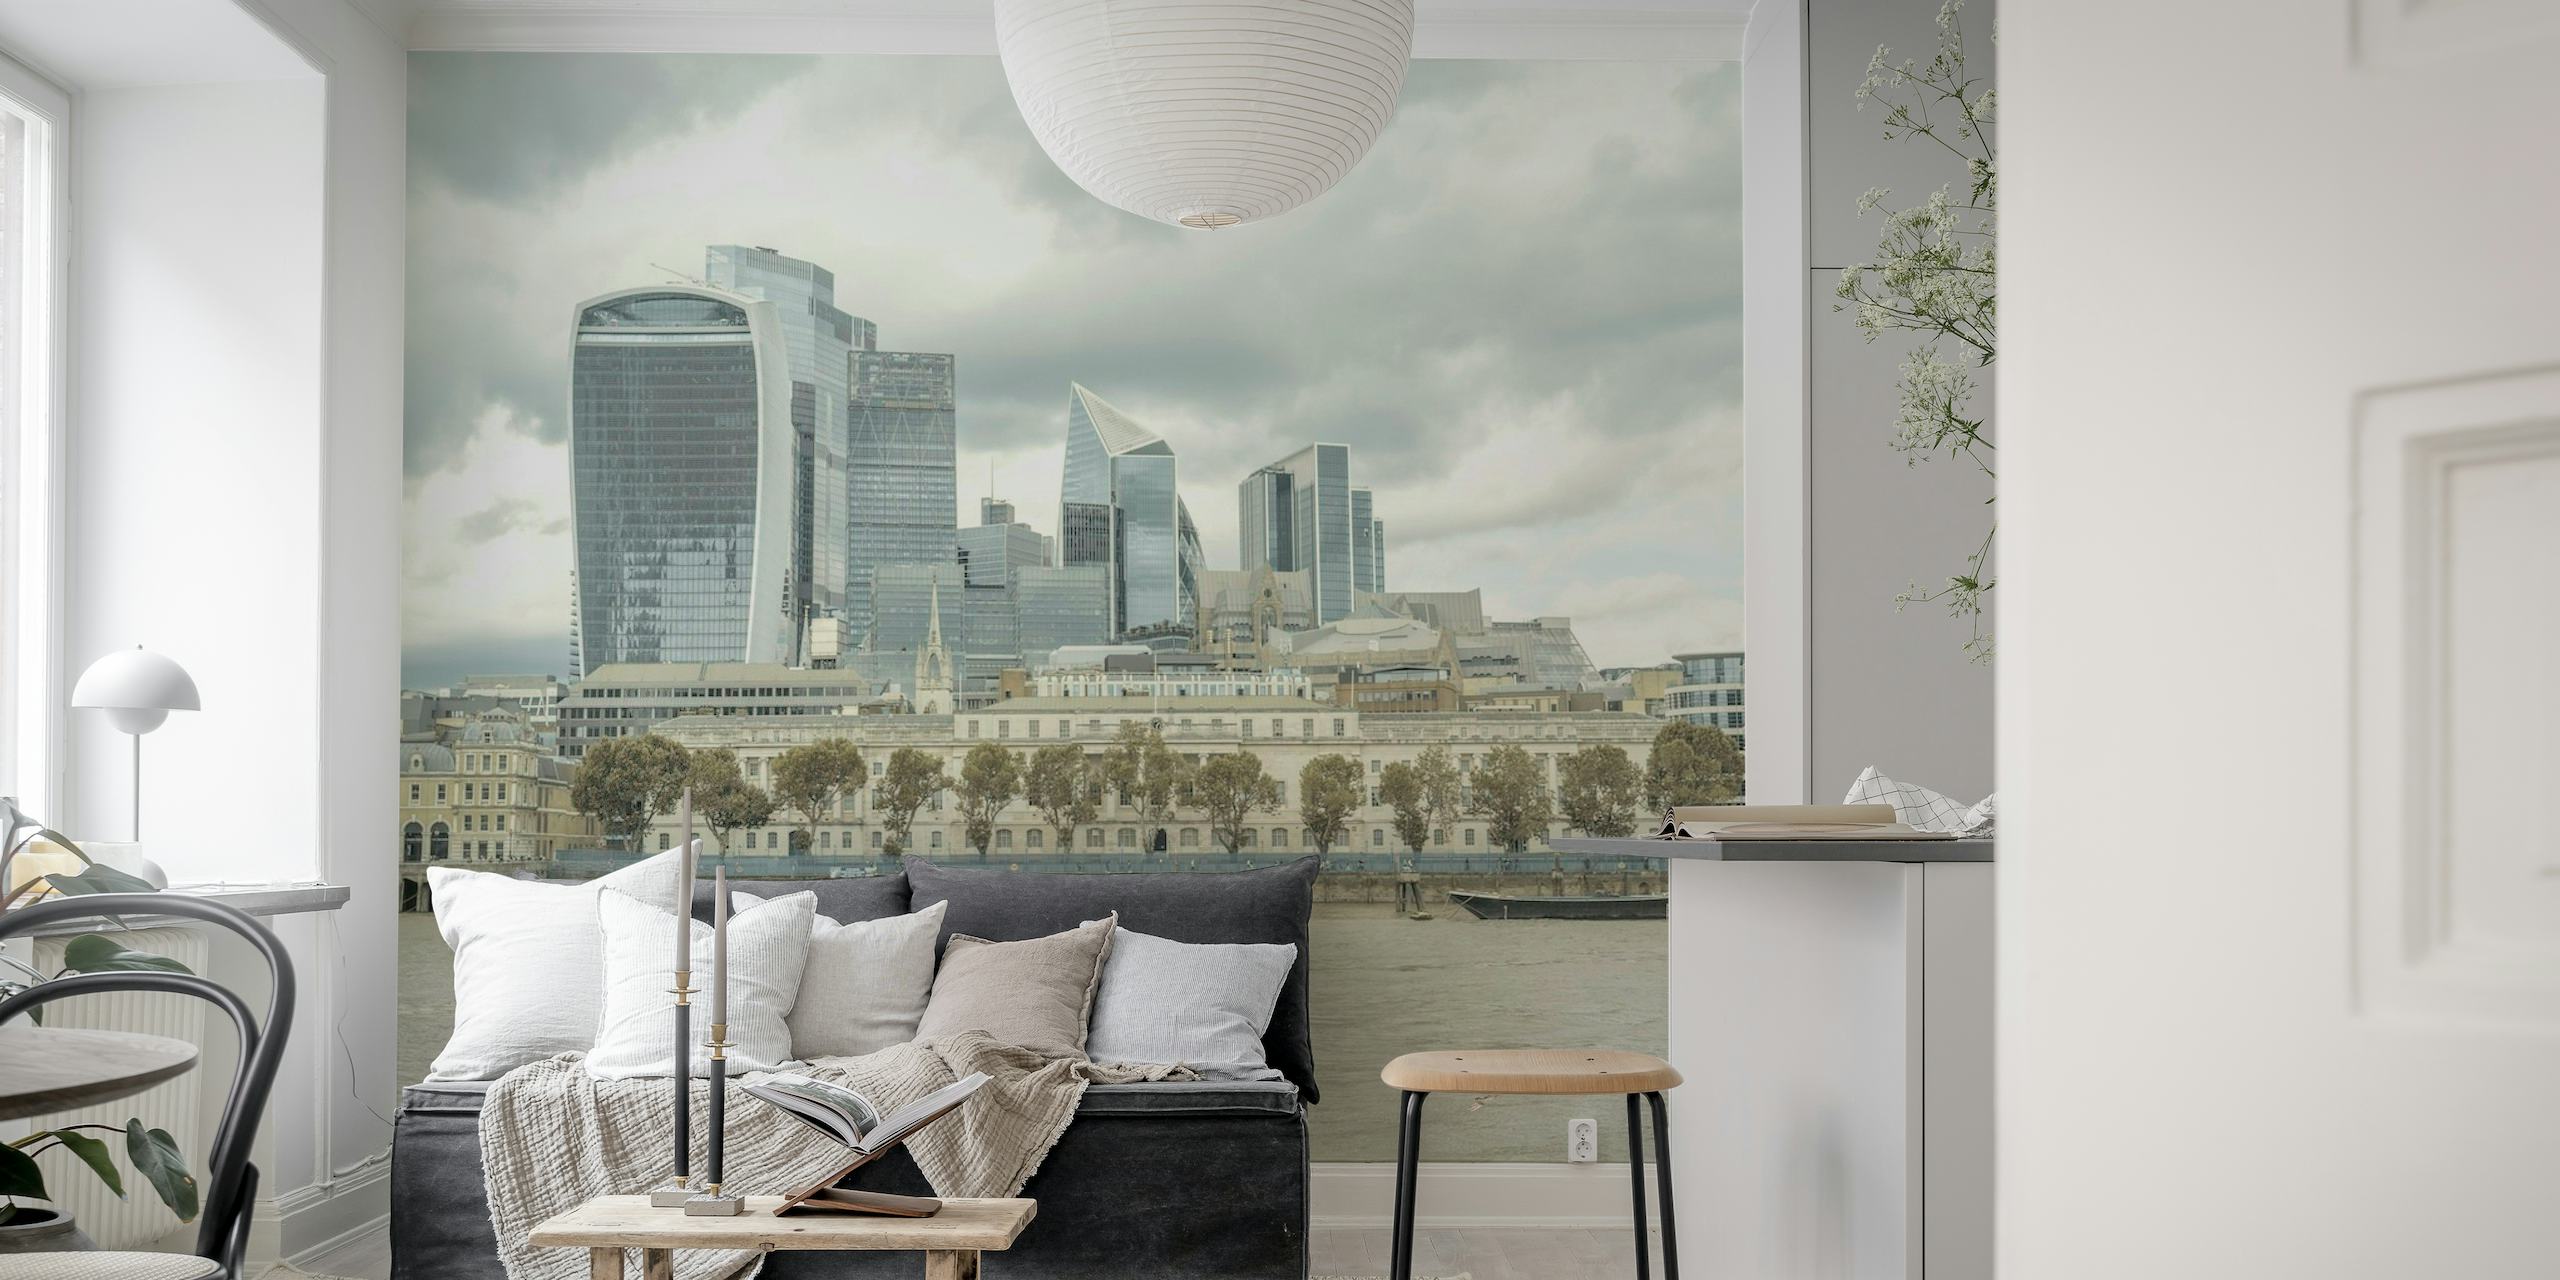 London skyline wall mural with overcast sky and Thames River